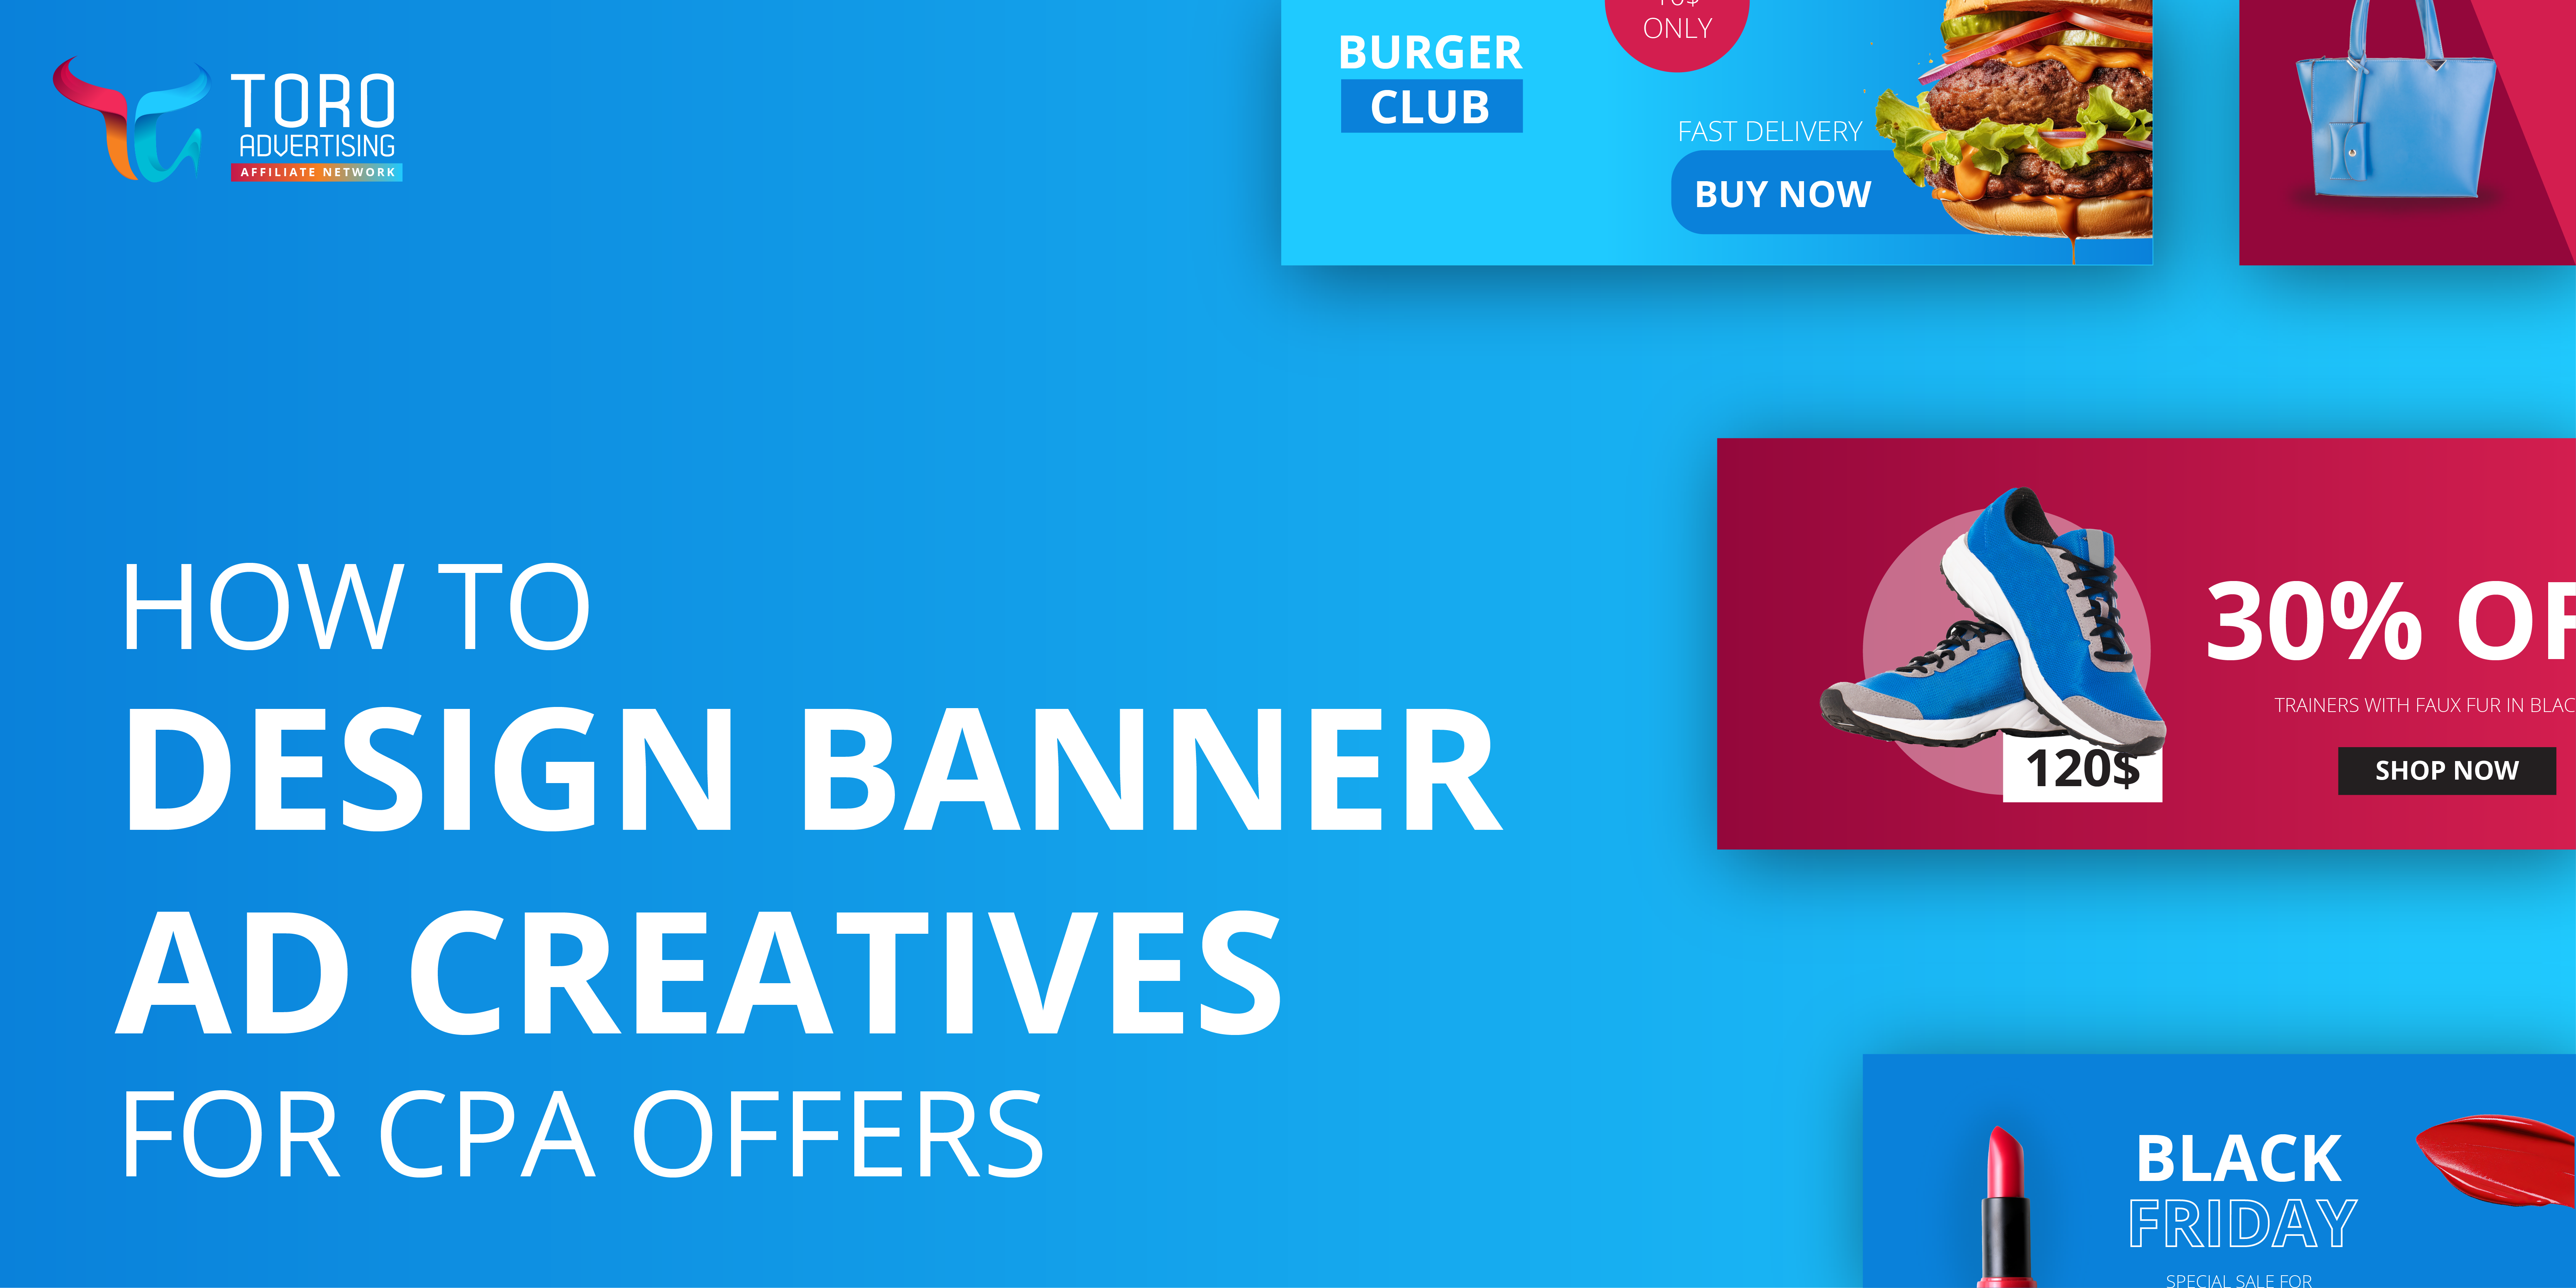 How to Design Banner Ad Creatives for CPA offers